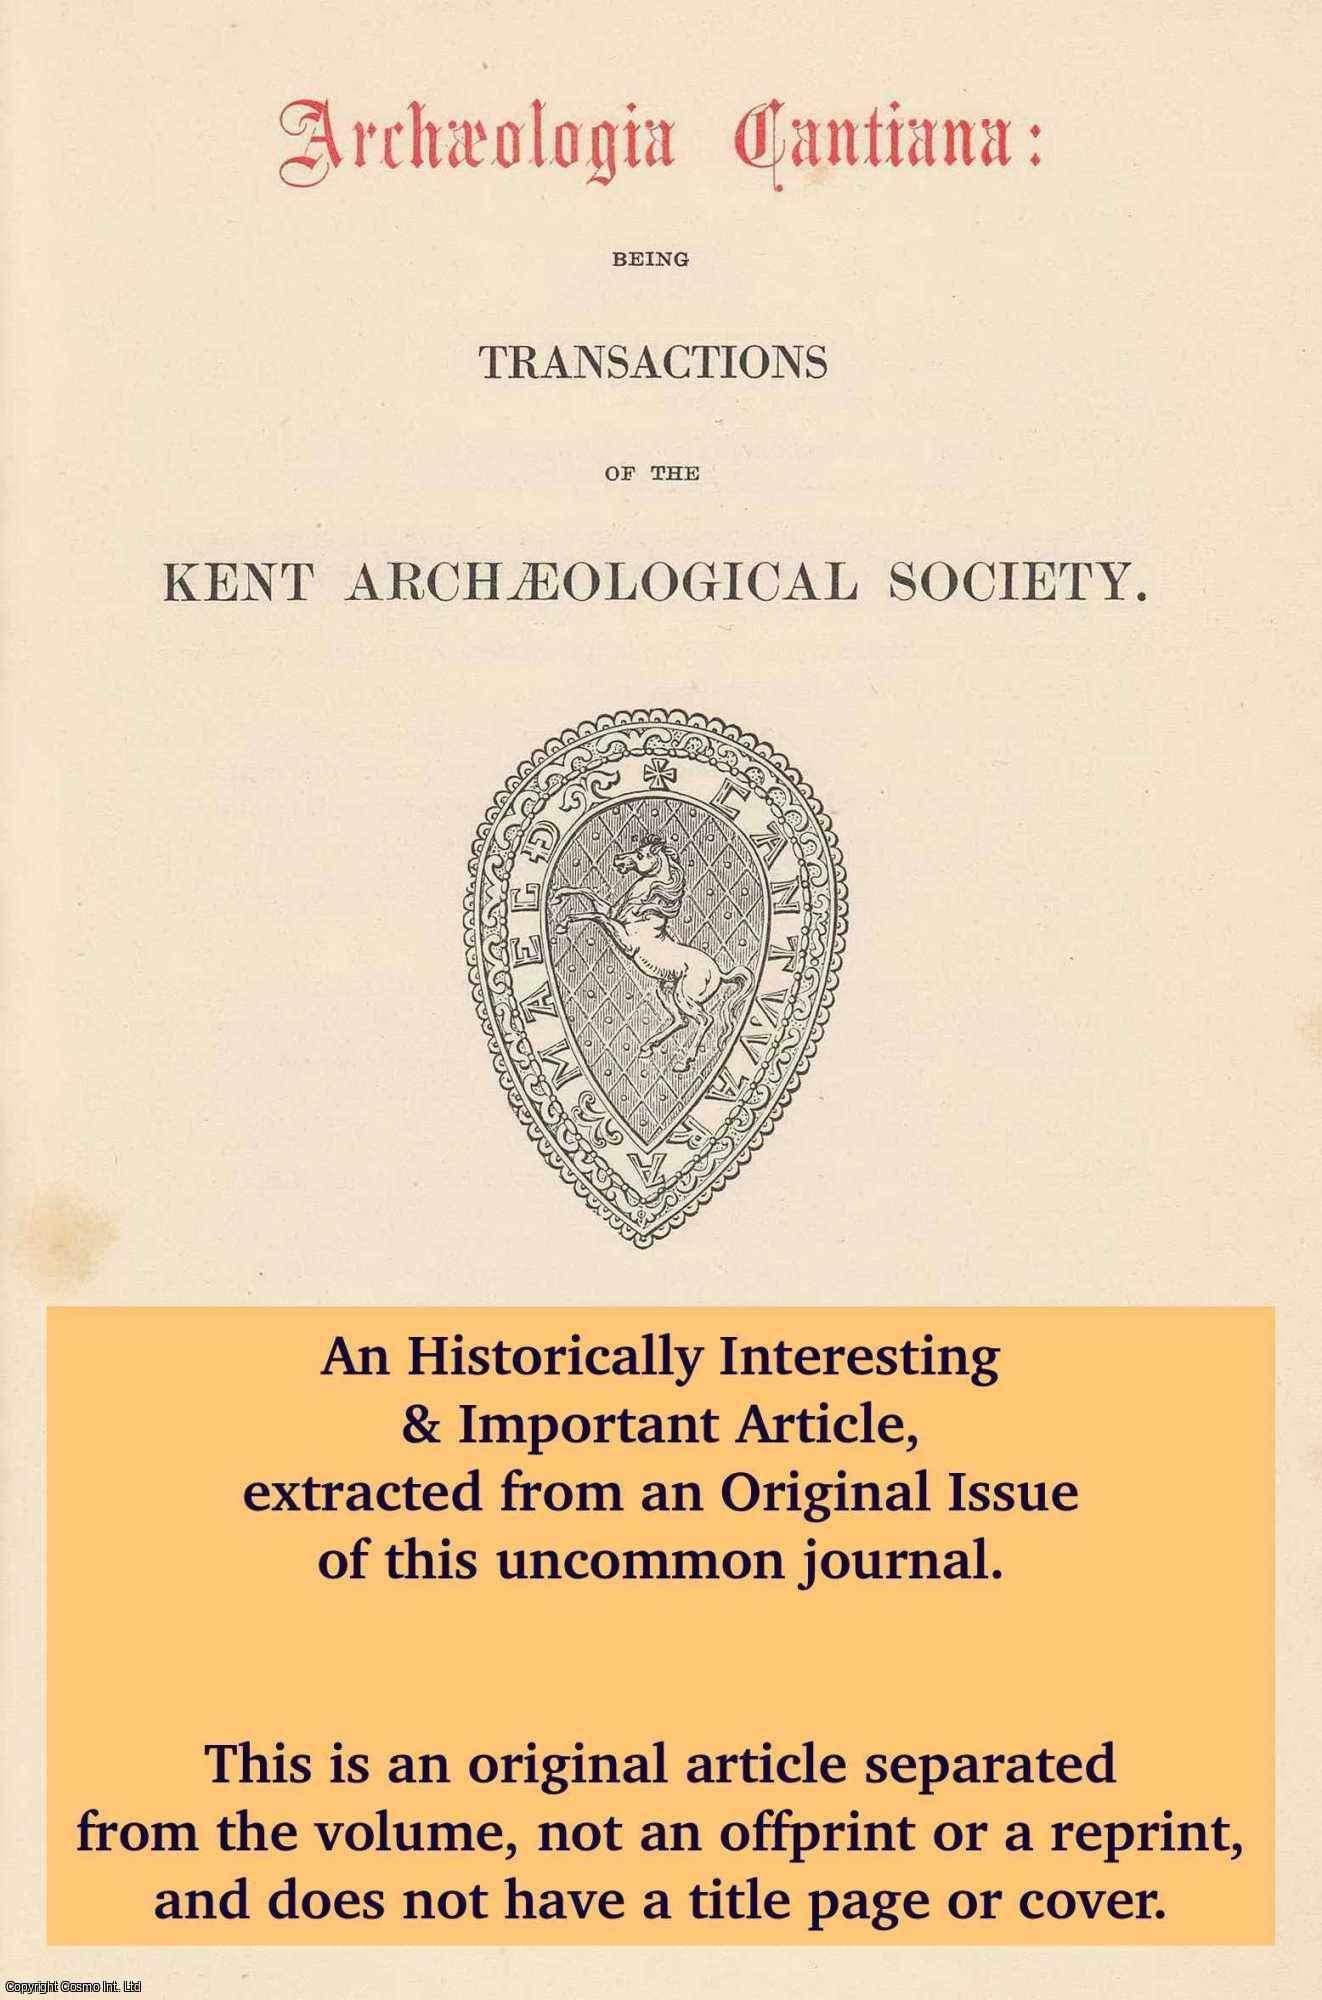 John Whyman - Obituary: Professor Bryan Keith-Lucas, C.B.E. (1912-1996) An original article from The Archaeologia Cantiana: Transactions of The Kent Archaeological Society, 1997.